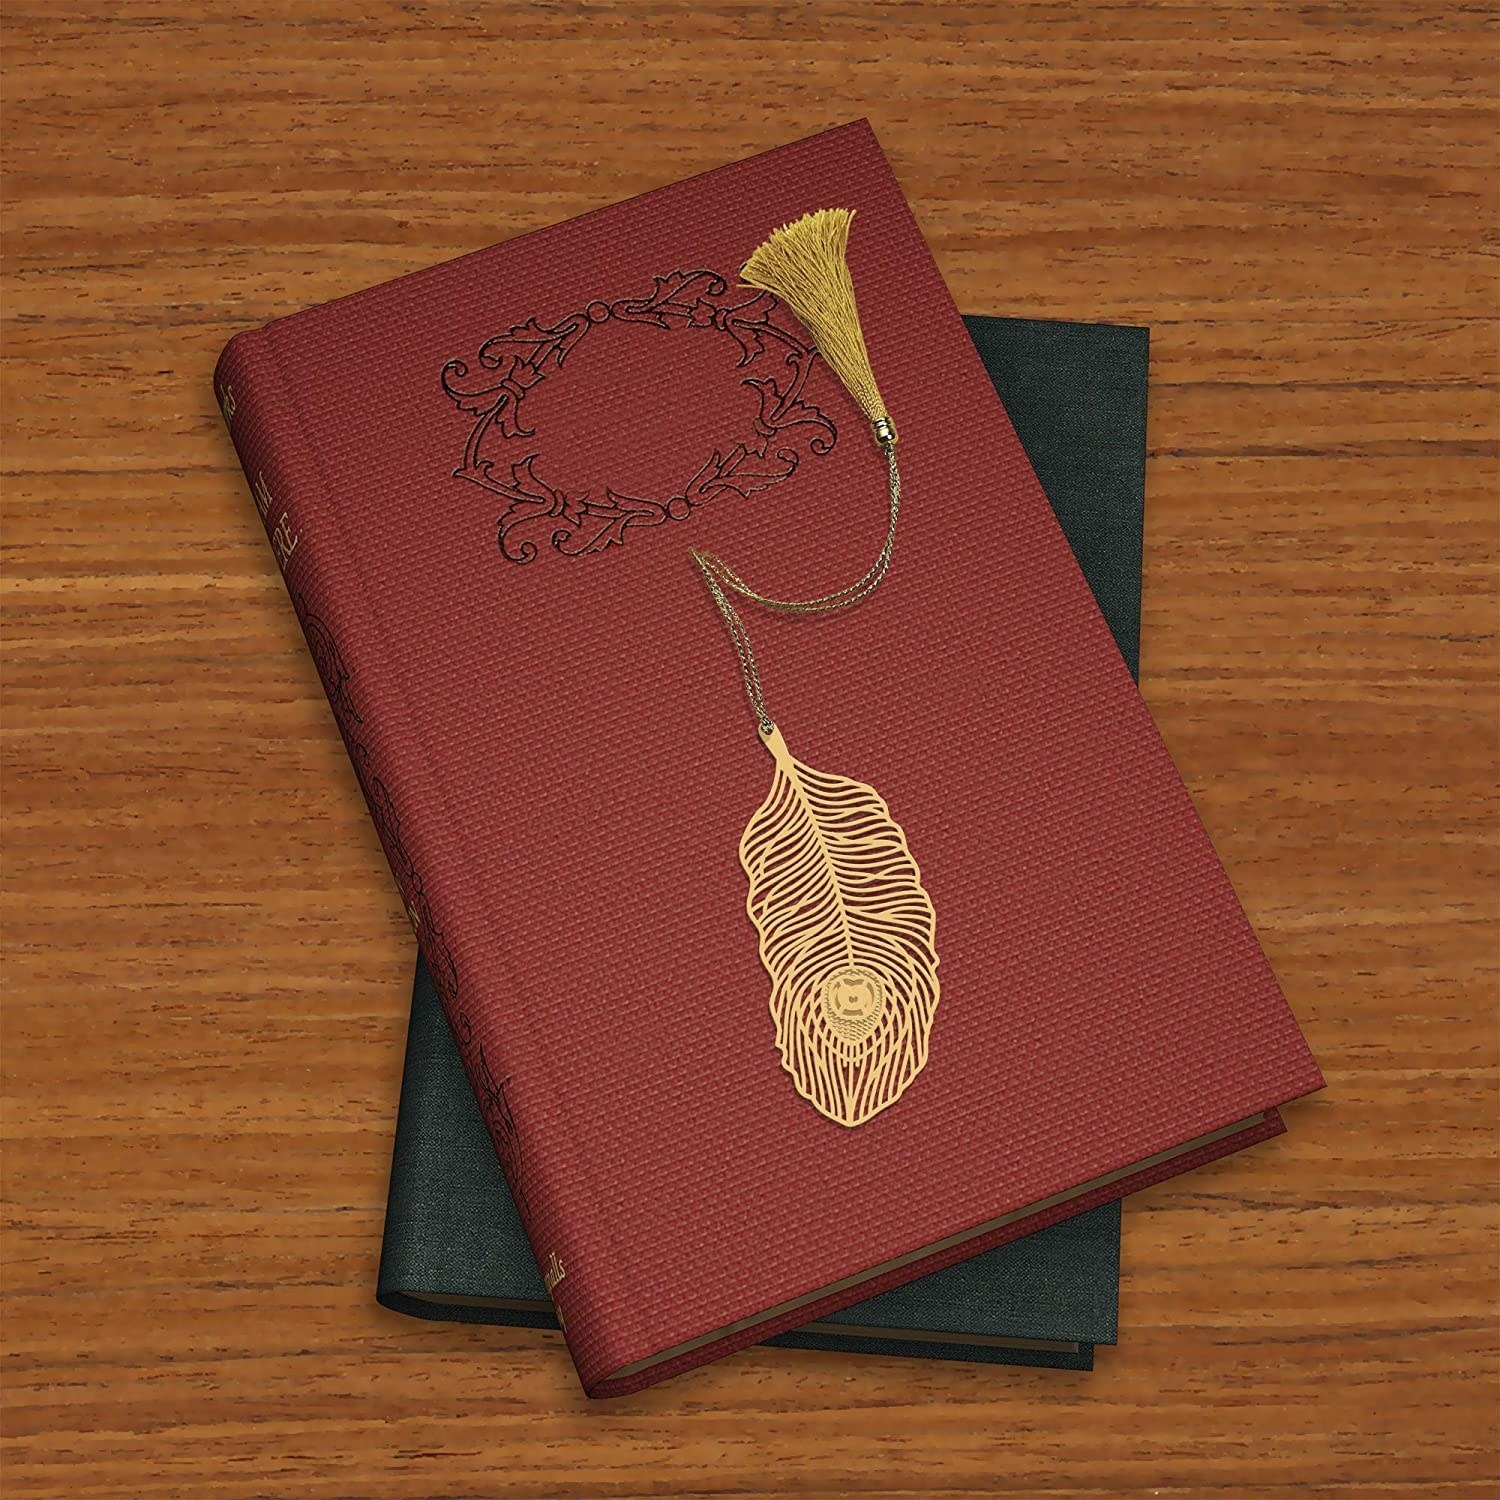 A brass leaf bookmark on top of a book